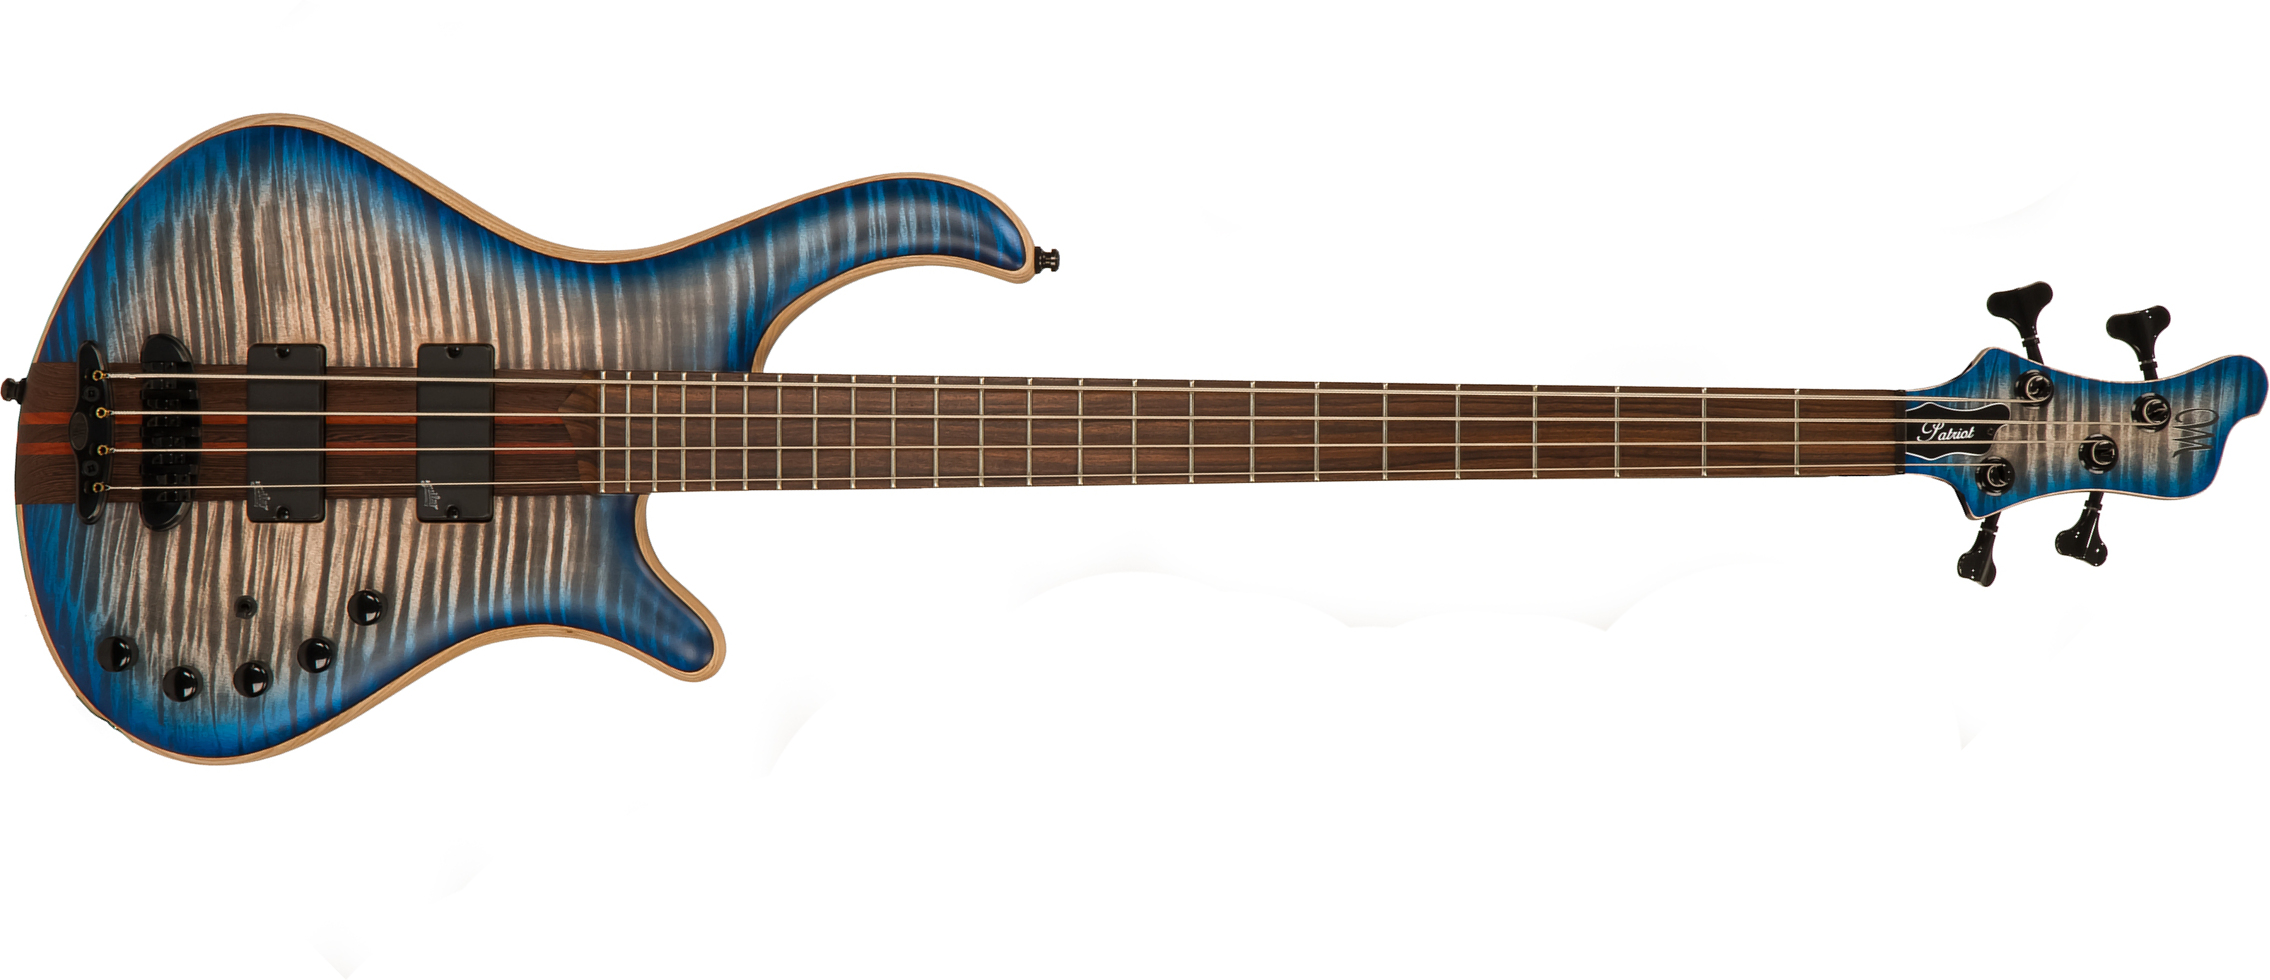 Mayones Guitars Patriot 4-cordes Aguilar Rw - Jeans Blue Flamed Maple - Solid body elektrische bas - Main picture